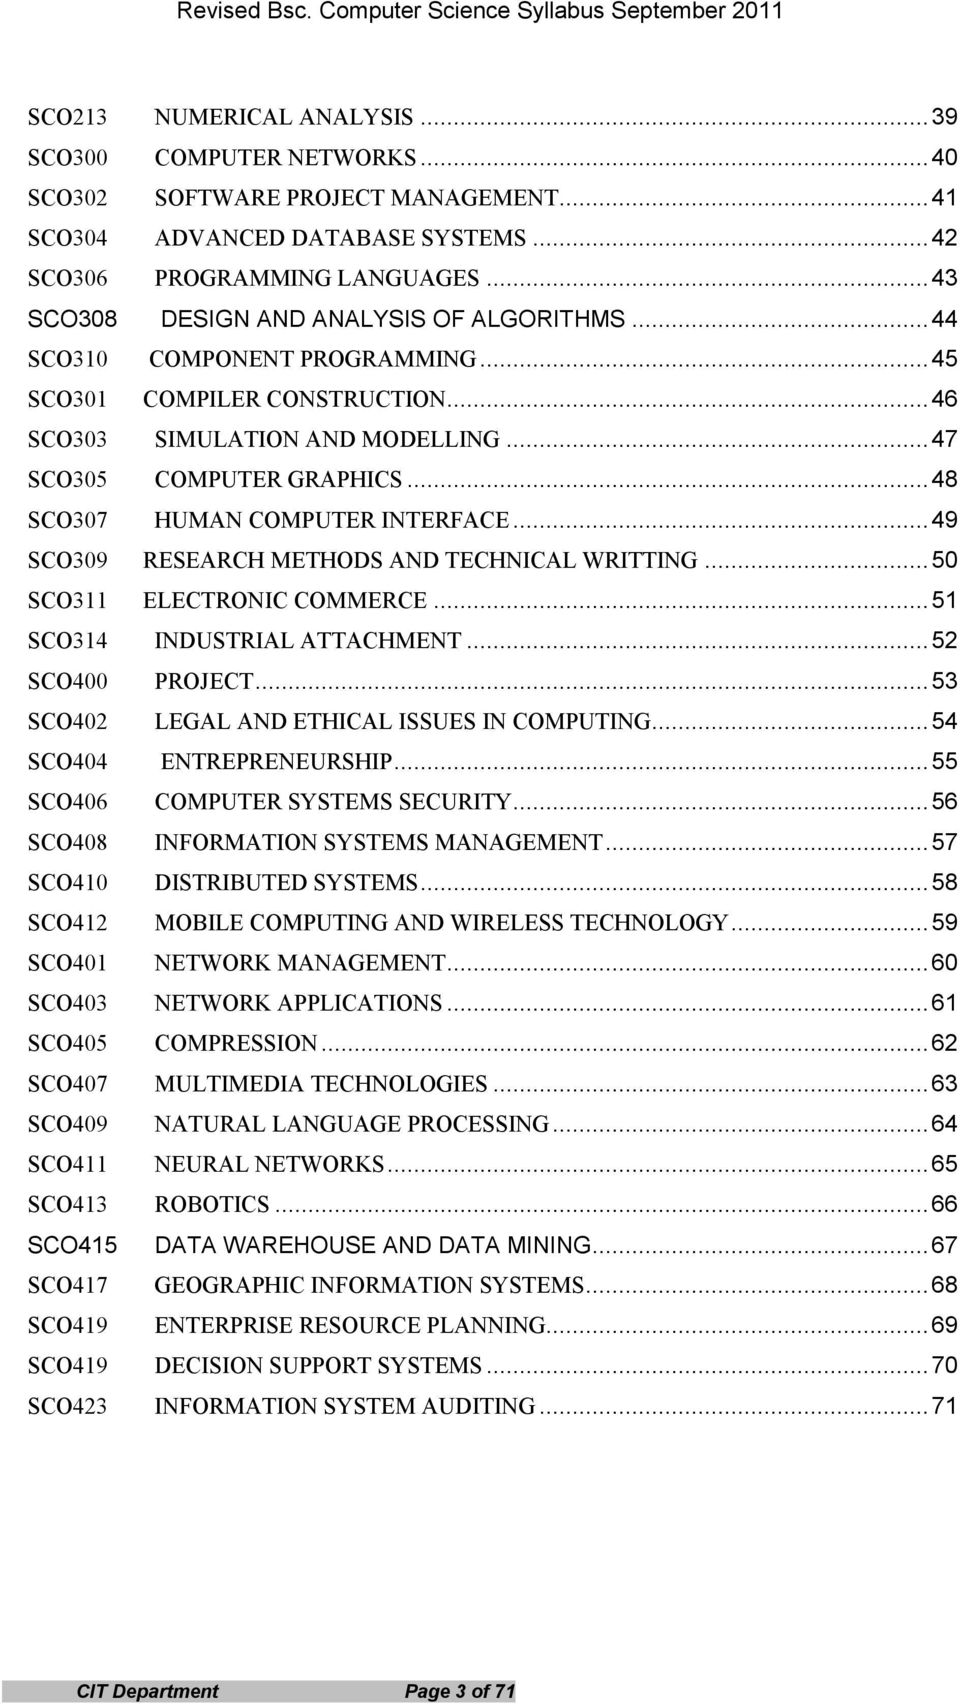 .. 48 SCO307 HUMAN COMPUTER INTERFACE... 49 SCO309 RESEARCH METHODS AND TECHNICAL WRITTING... 50 SCO311 ELECTRONIC COMMERCE... 51 SCO314 INDUSTRIAL ATTACHMENT... 52 SCO400 PROJECT.